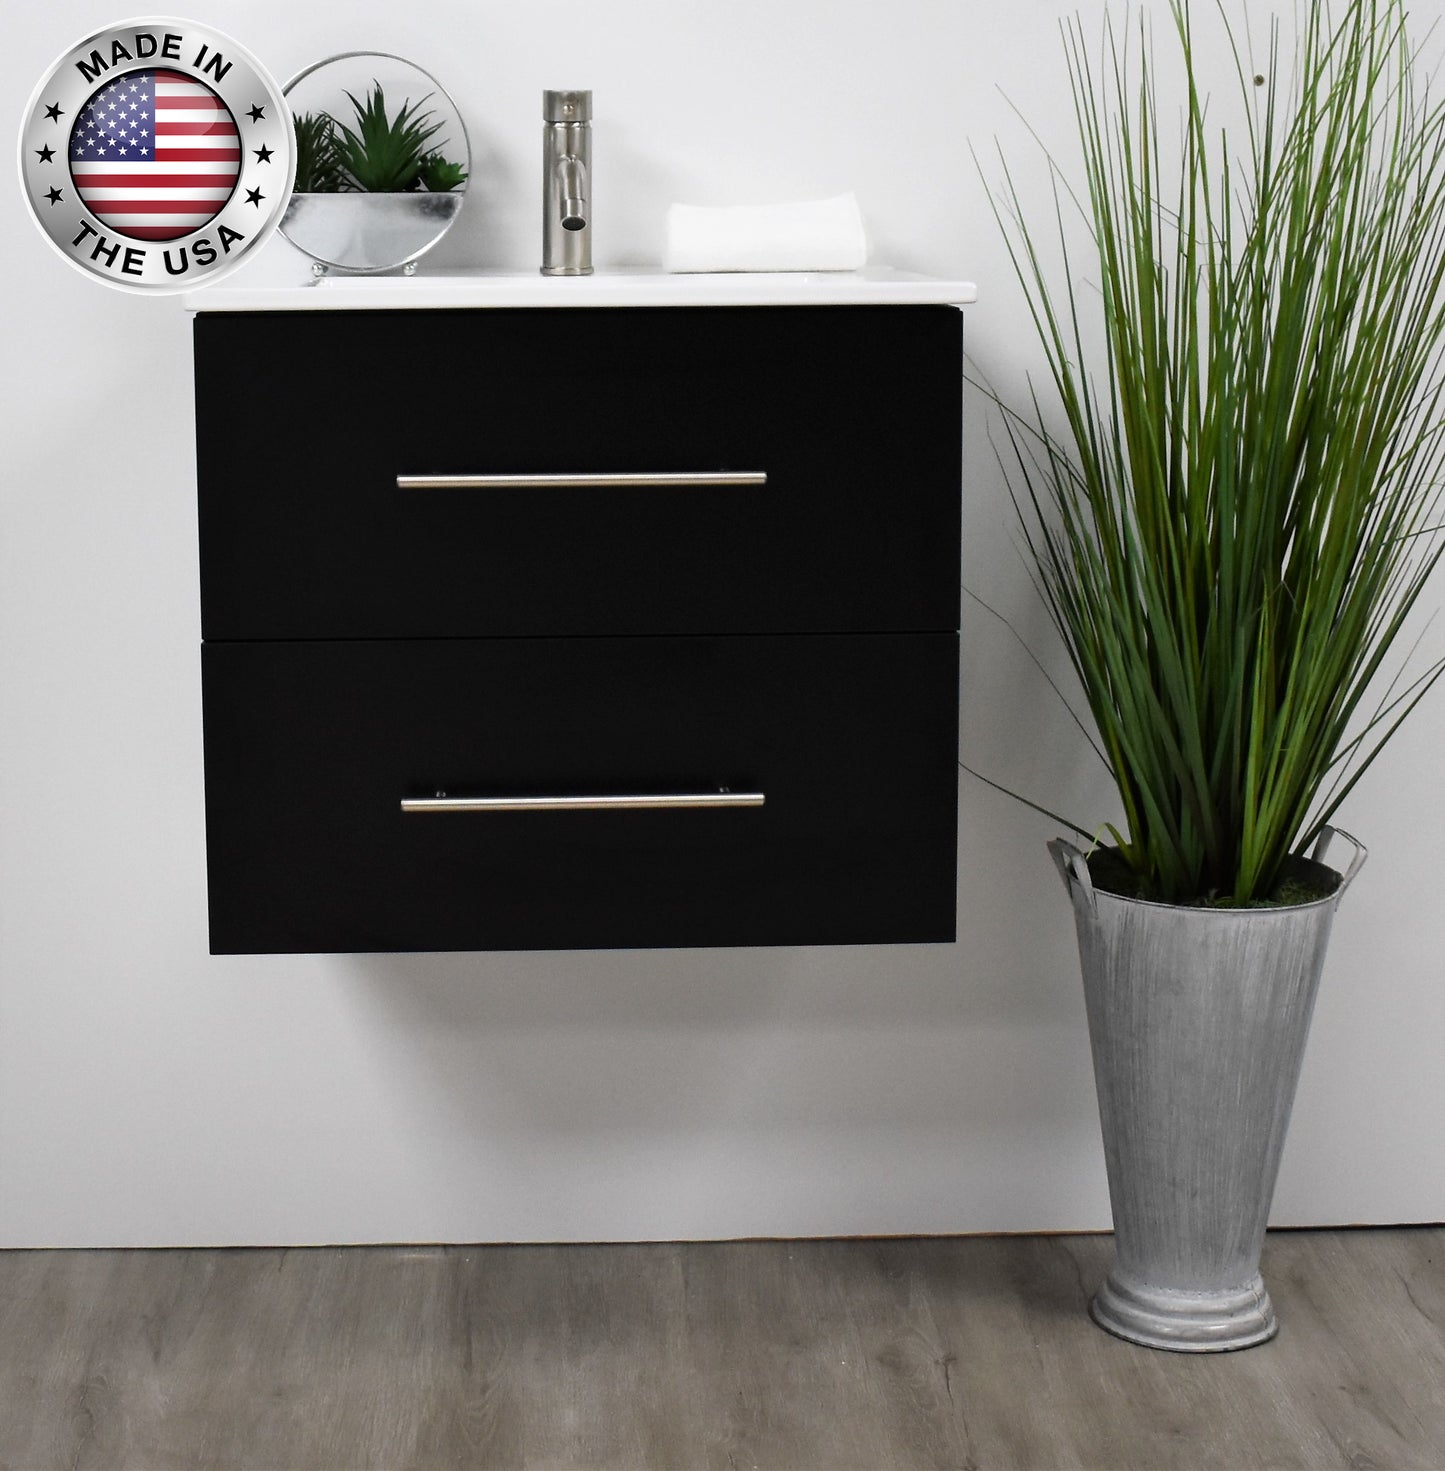 Volpa Napa 30" Modern Wall-Mounted Floating Bathroom Vanity with Ceramic Top and Round Handles - Luxe Bathroom Vanities Luxury Bathroom Fixtures Bathroom Furniture